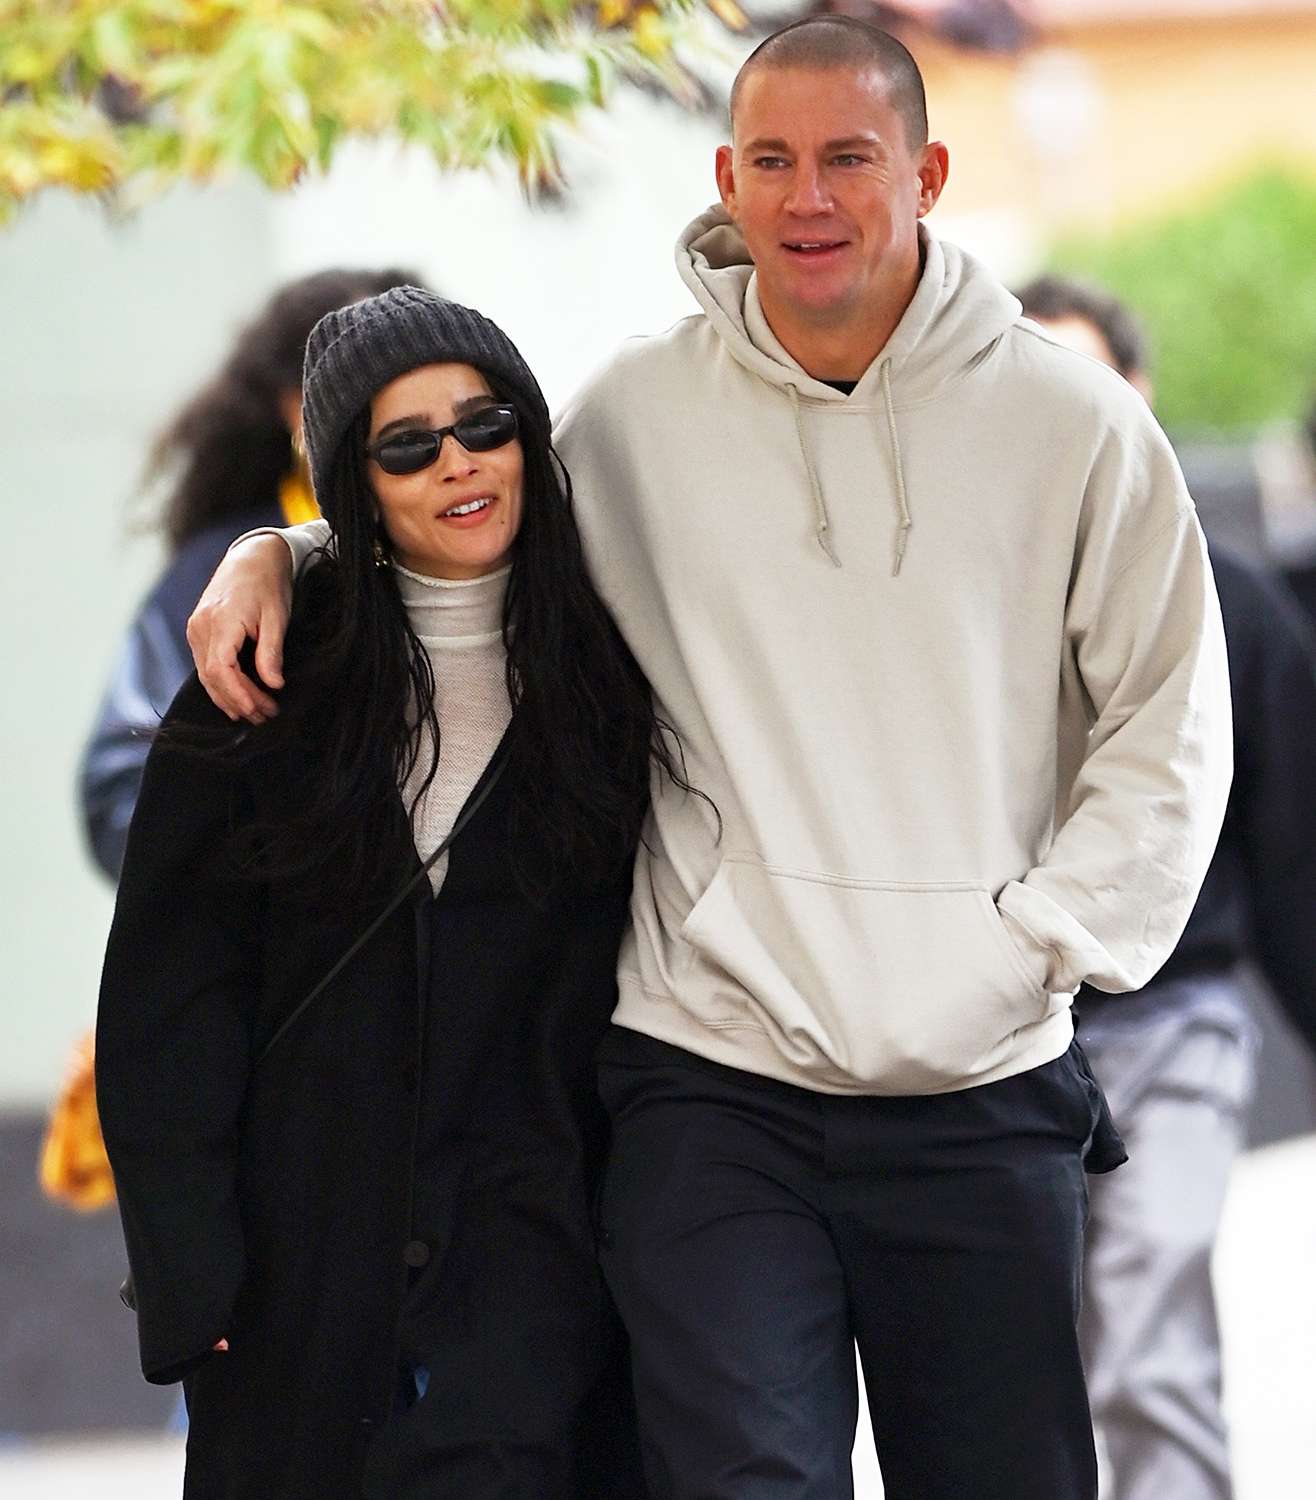 ZoÃ« Kravitz and Channing Tatum Hold Hands on Their Way to Lunch in N.Y.C.